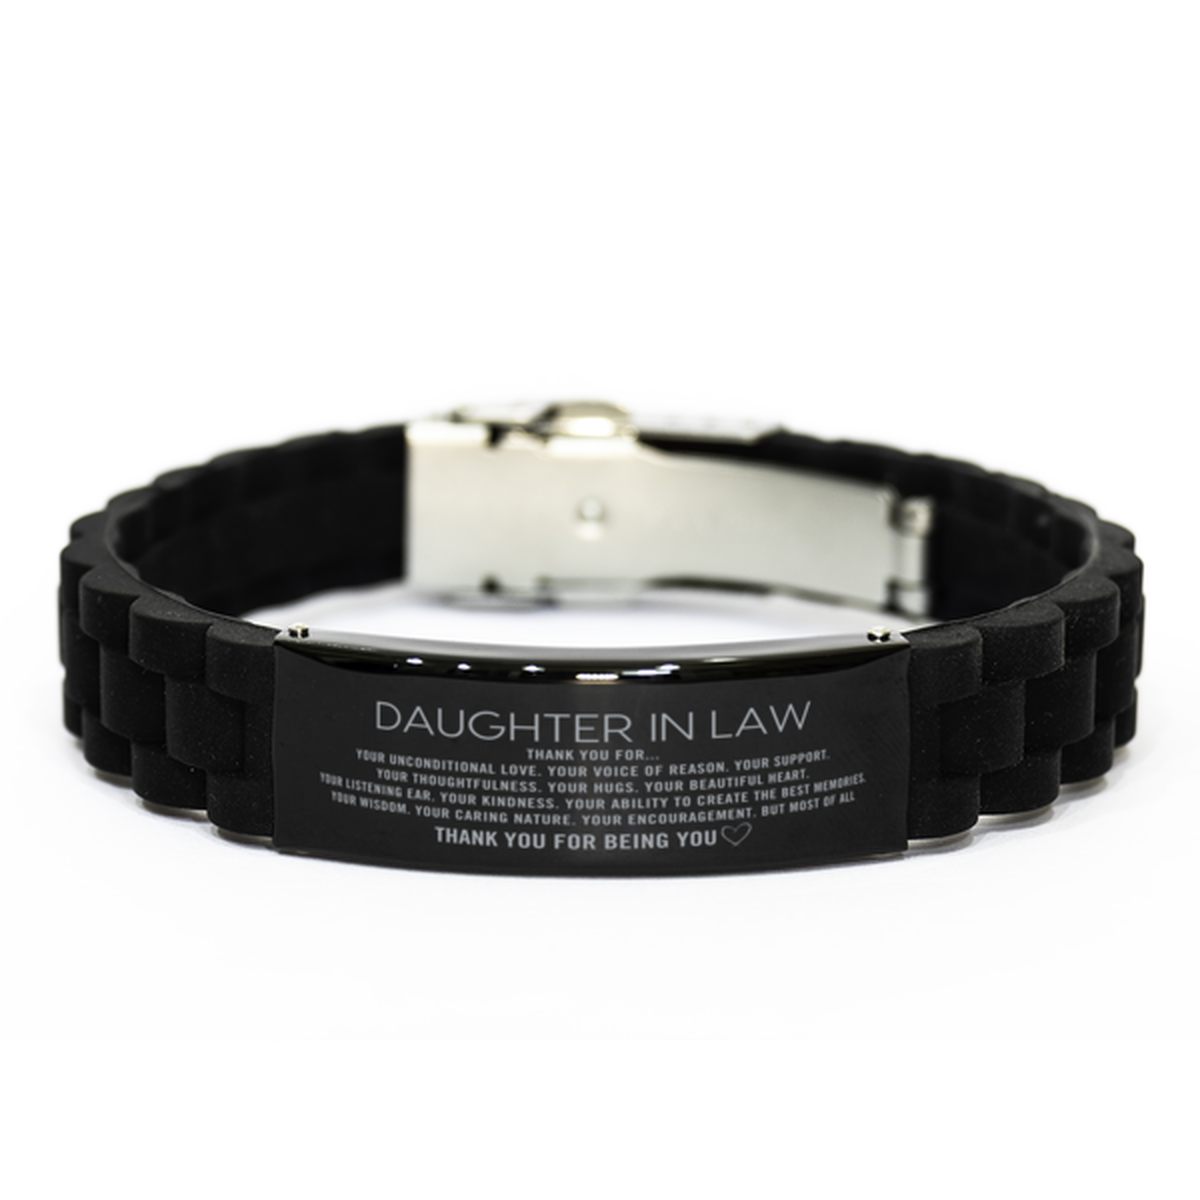 Daughter In Law Black Glidelock Clasp Bracelet Custom, Engraved Gifts For Daughter In Law Christmas Graduation Birthday Gifts for Men Women Daughter In Law Thank you for Your unconditional love